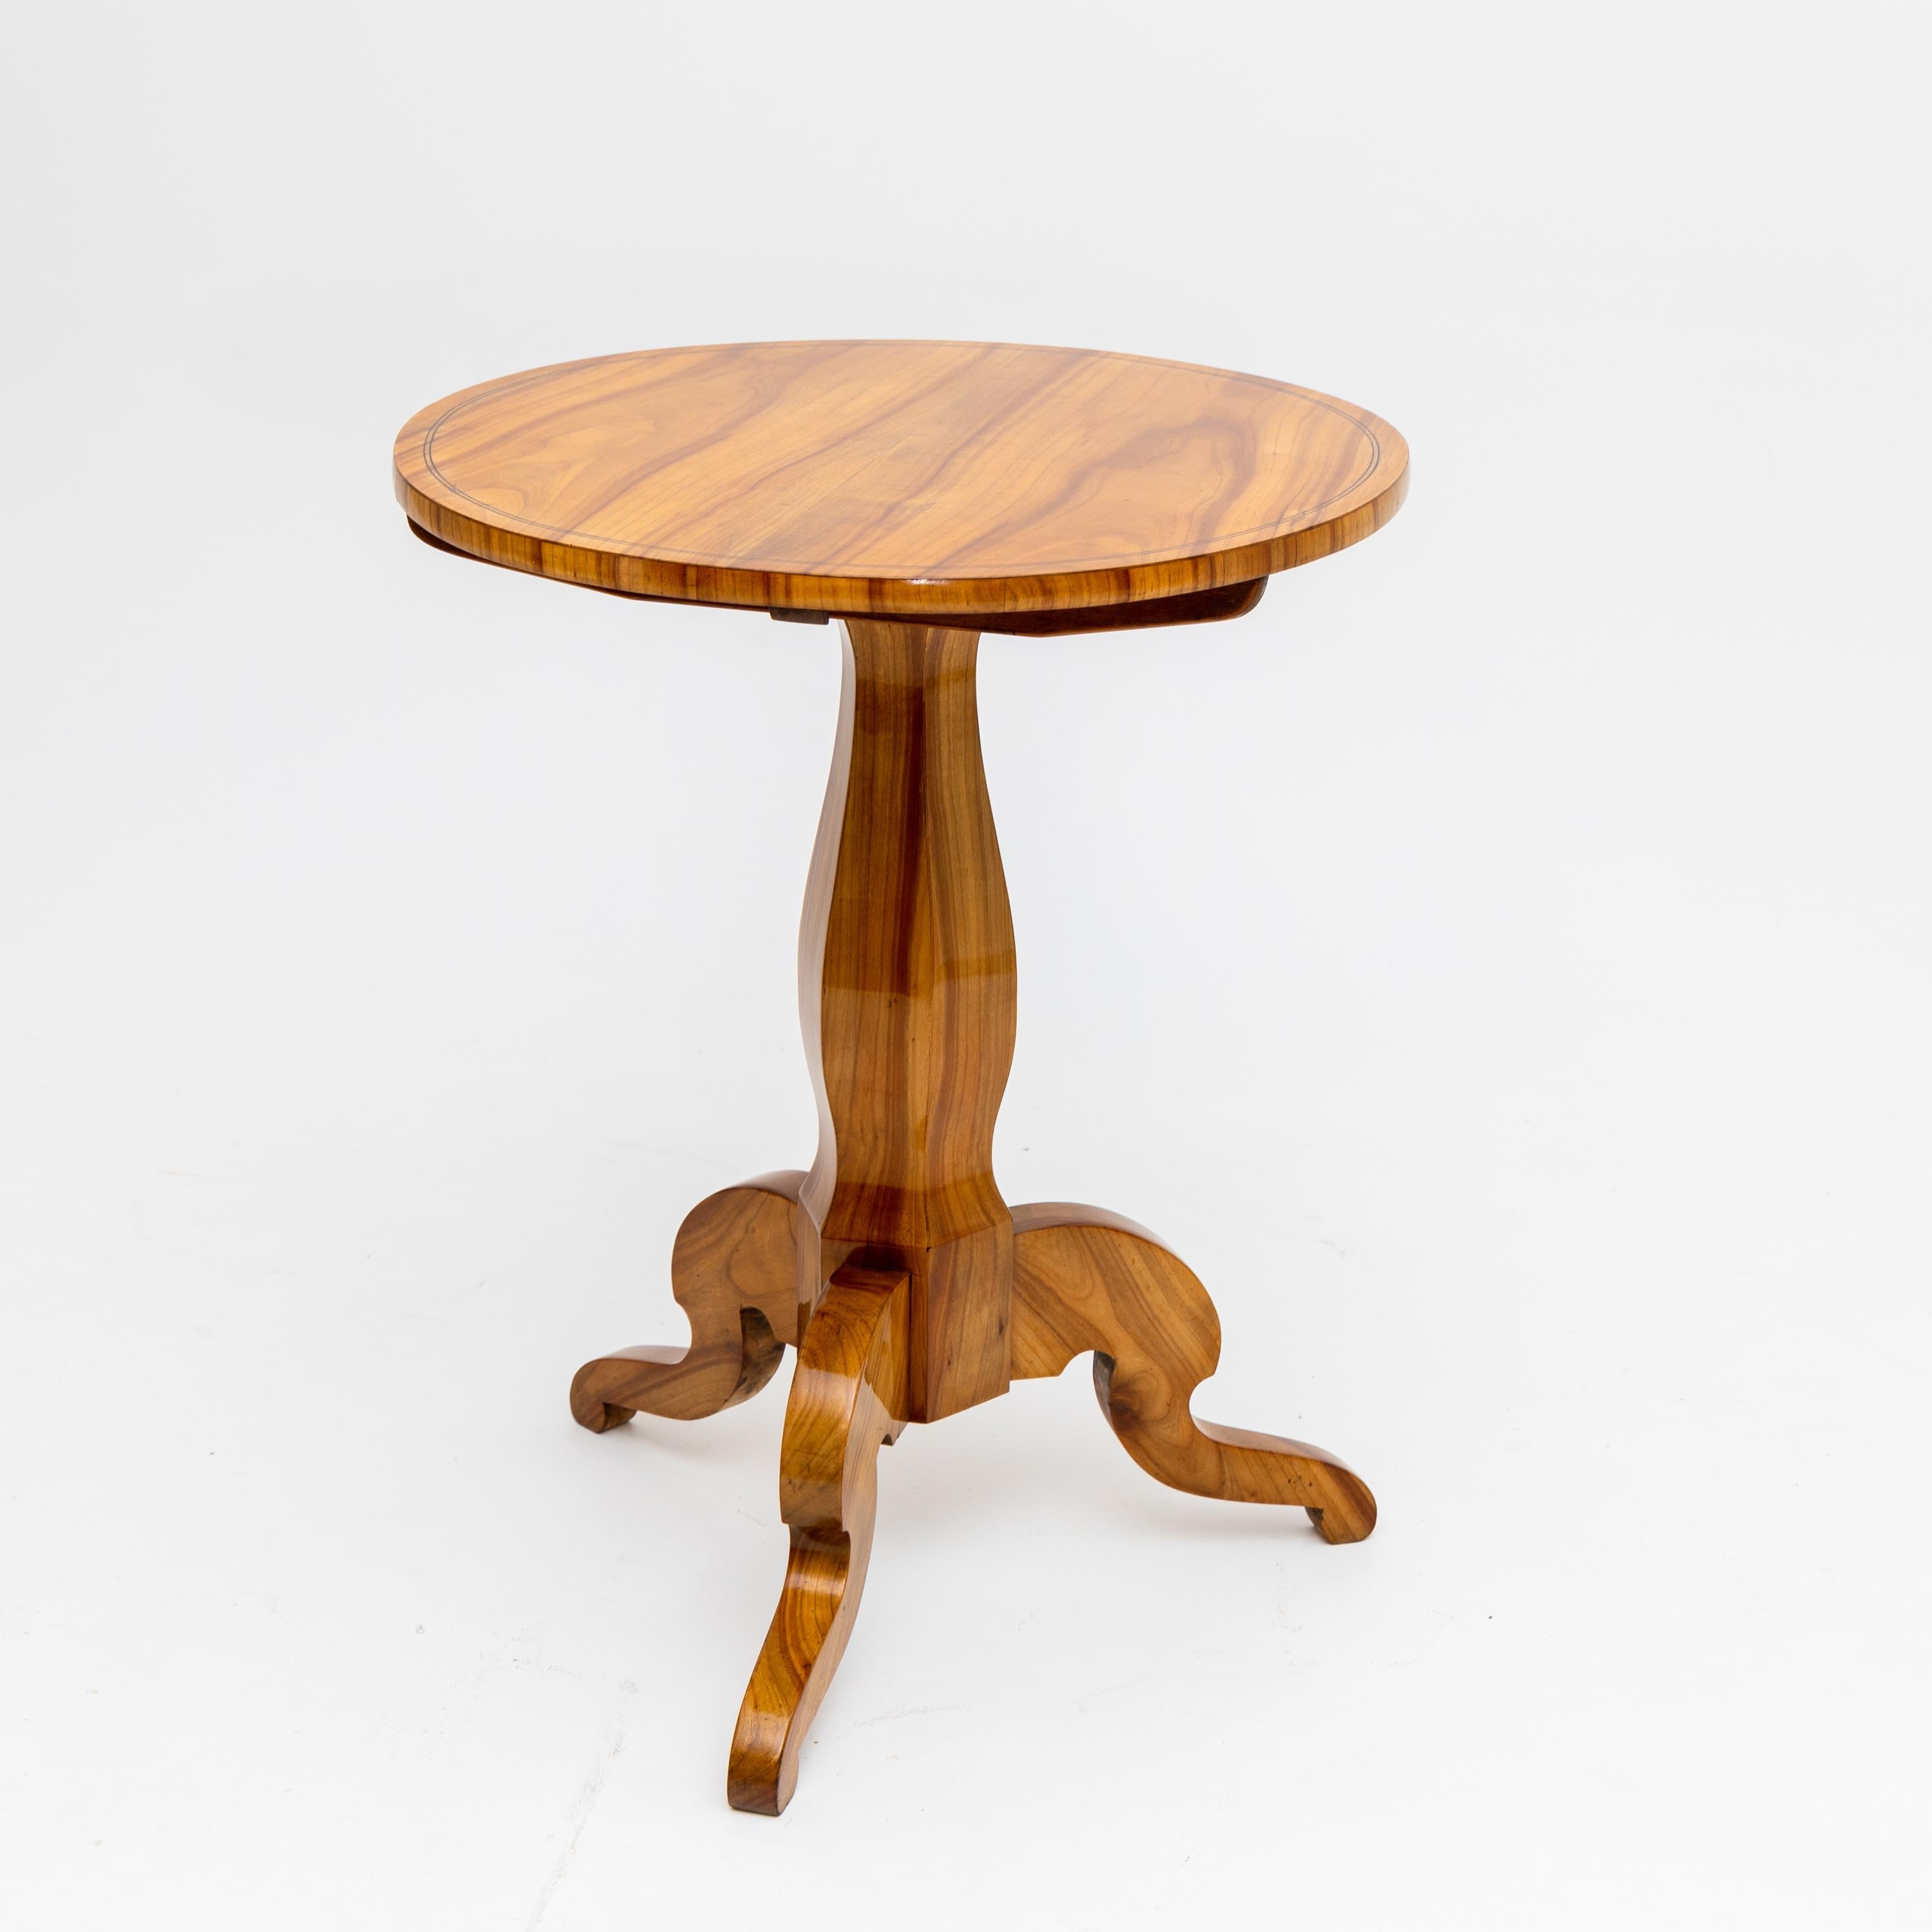 Side table standing on three-legged stand with folding table top and radial thread inlays.